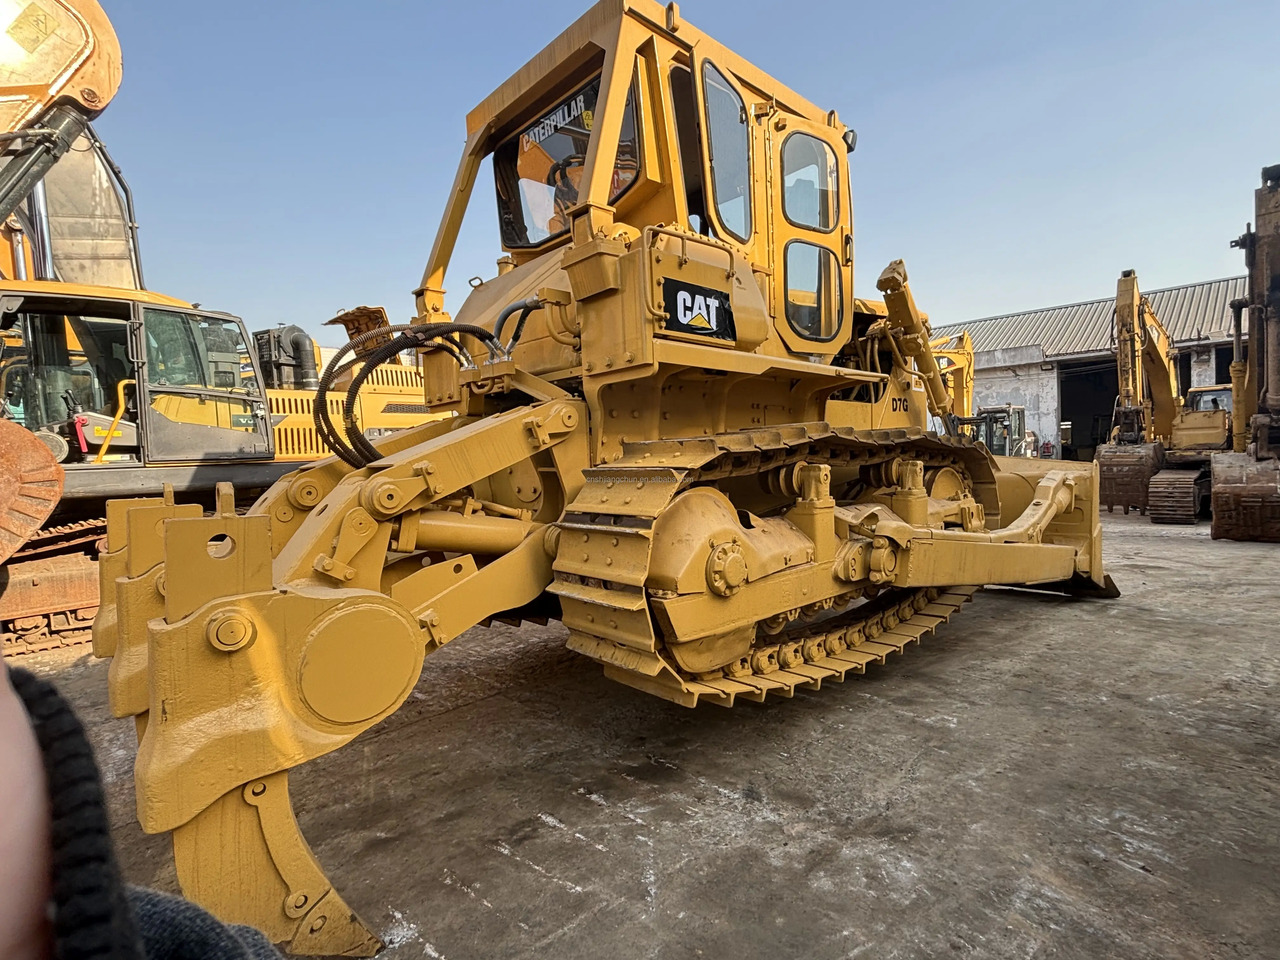 Bulldozer second hand bulldozer original from Japan Used CAT D7G bulldozer Original vehicle used Cater d7g bulldozer track: picture 6